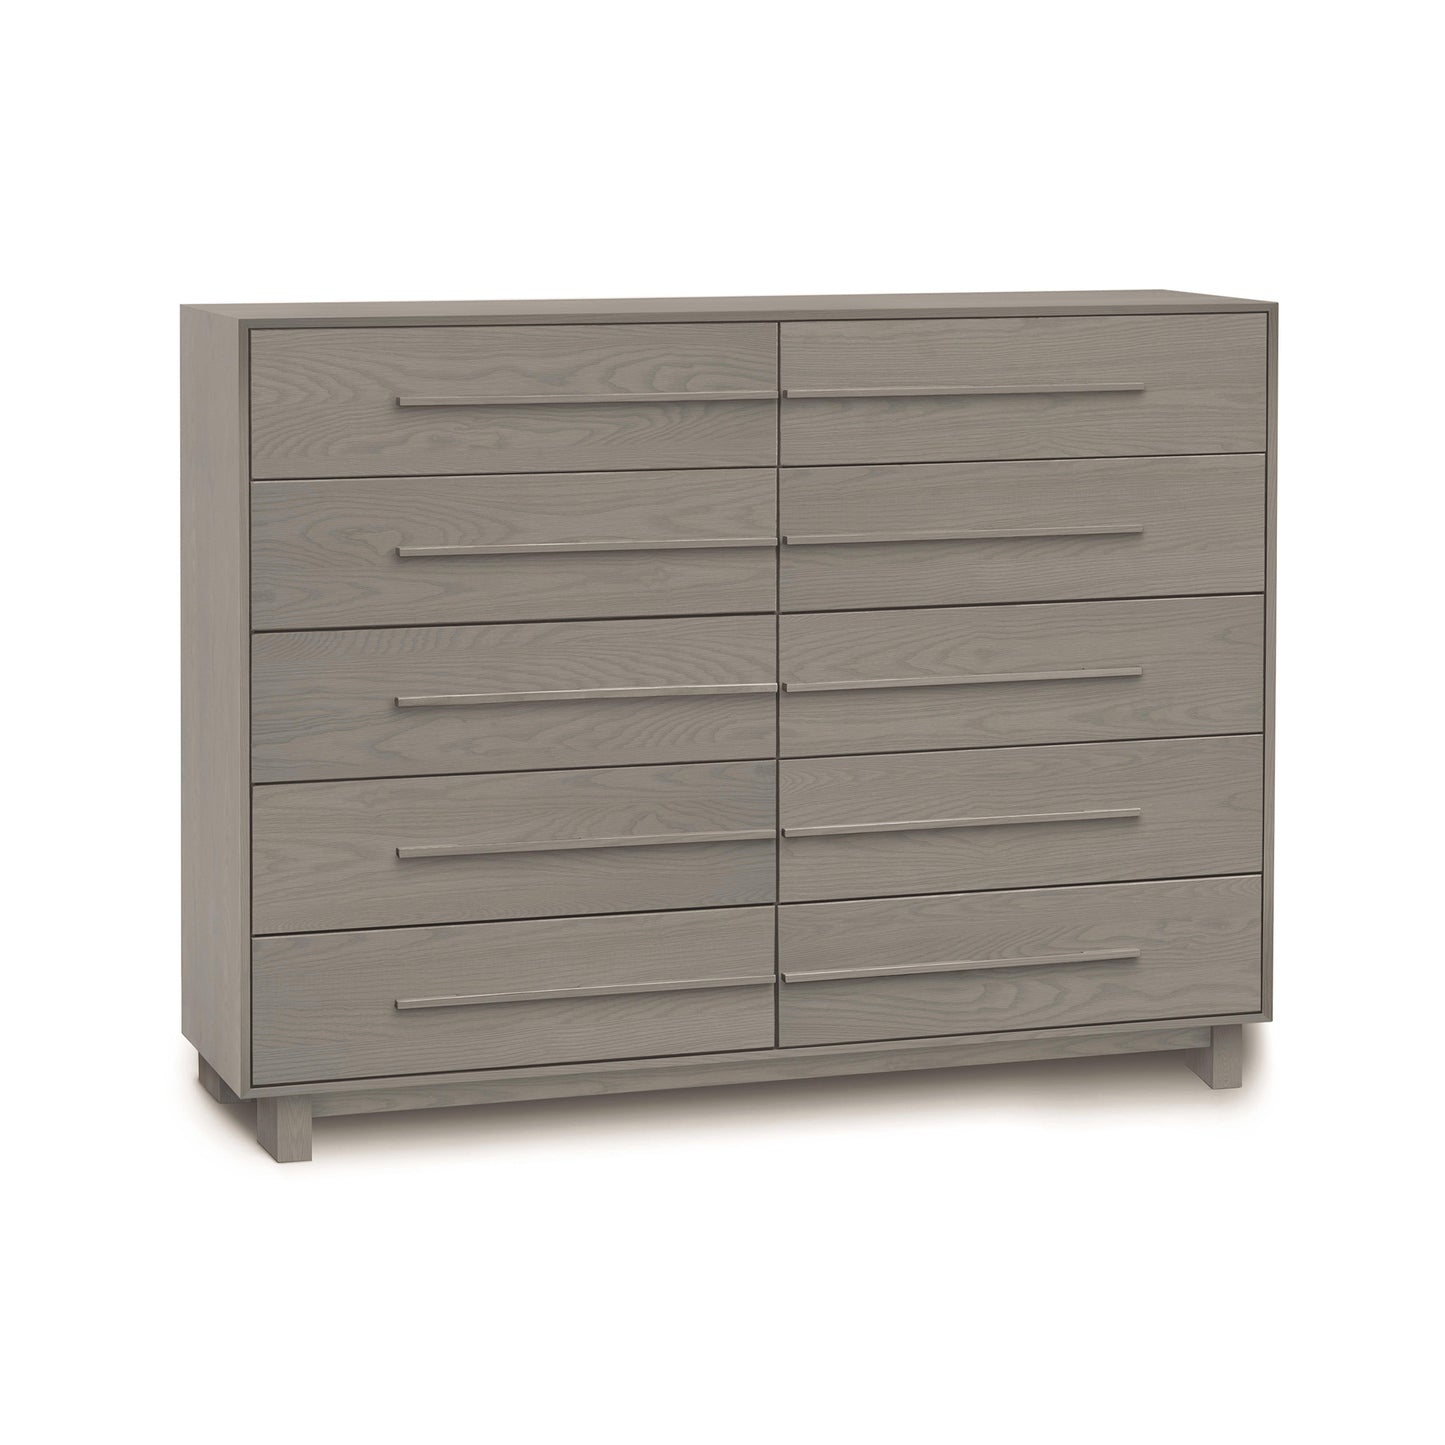 A modern gray wooden 10-drawer dresser from the Copeland Furniture Sloane Bedroom Furniture collection, isolated on a white background.